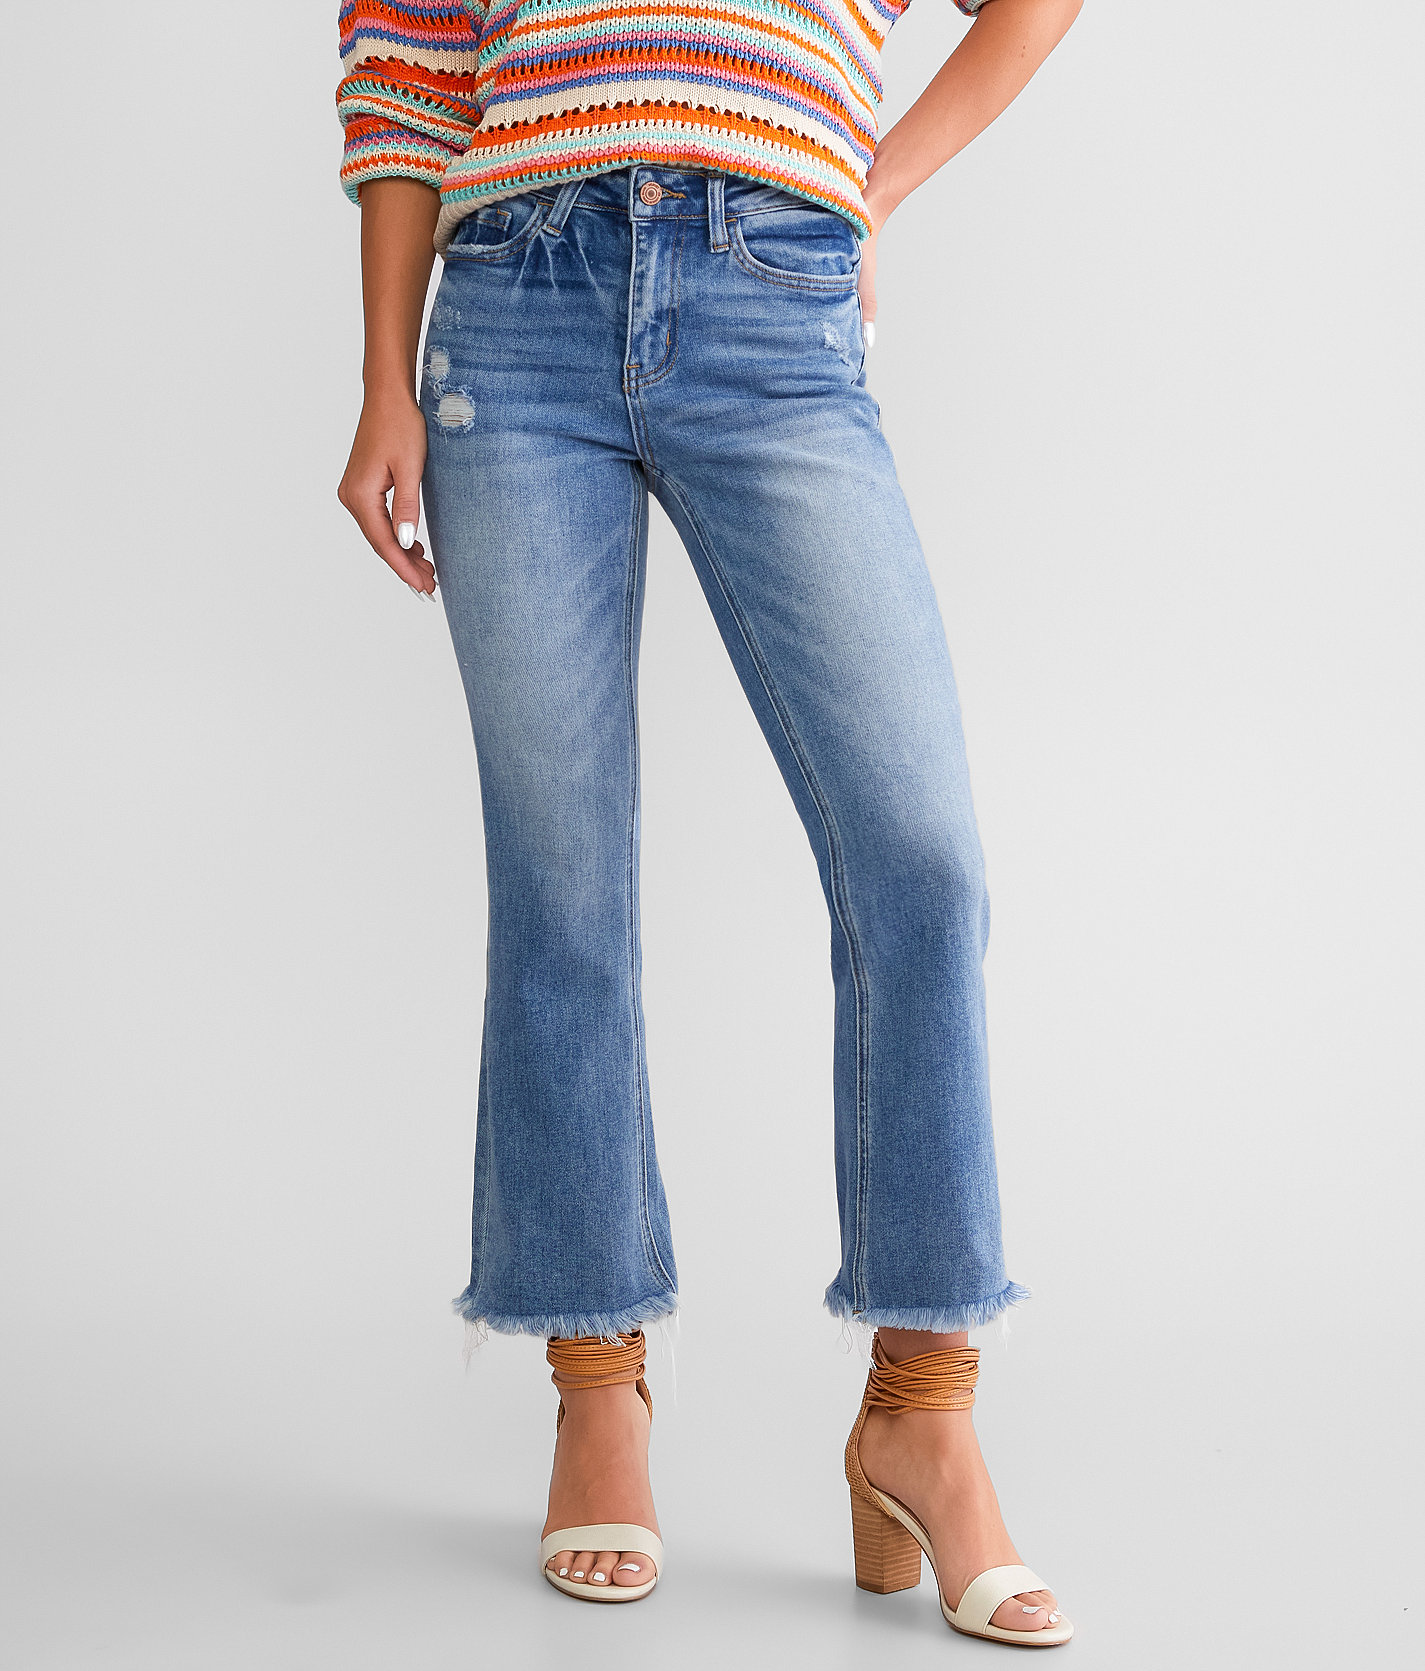 VERVET High Rise Cropped Flare Stretch Jean - Women's Jeans in Amber |  Buckle